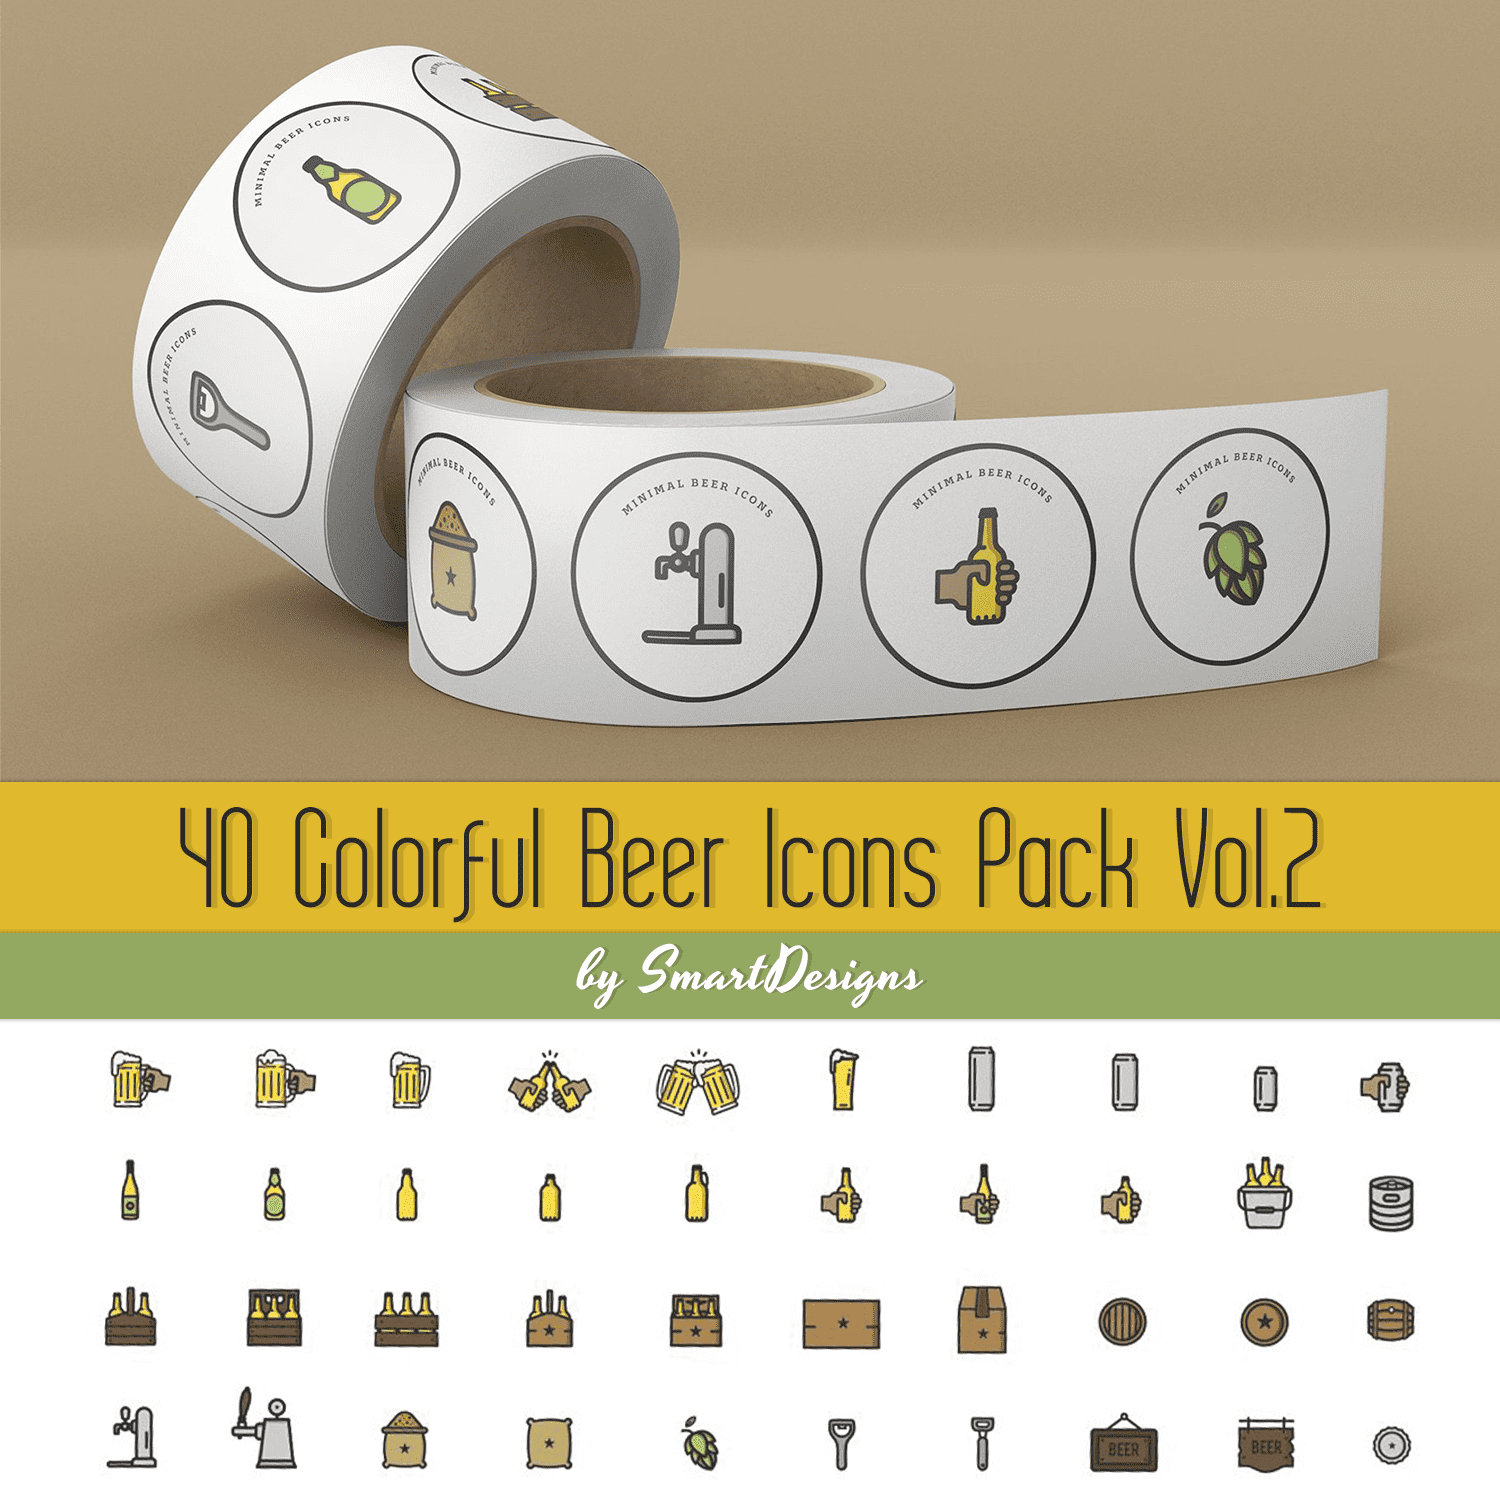 Preview сolorful beer icons pack vol.2.